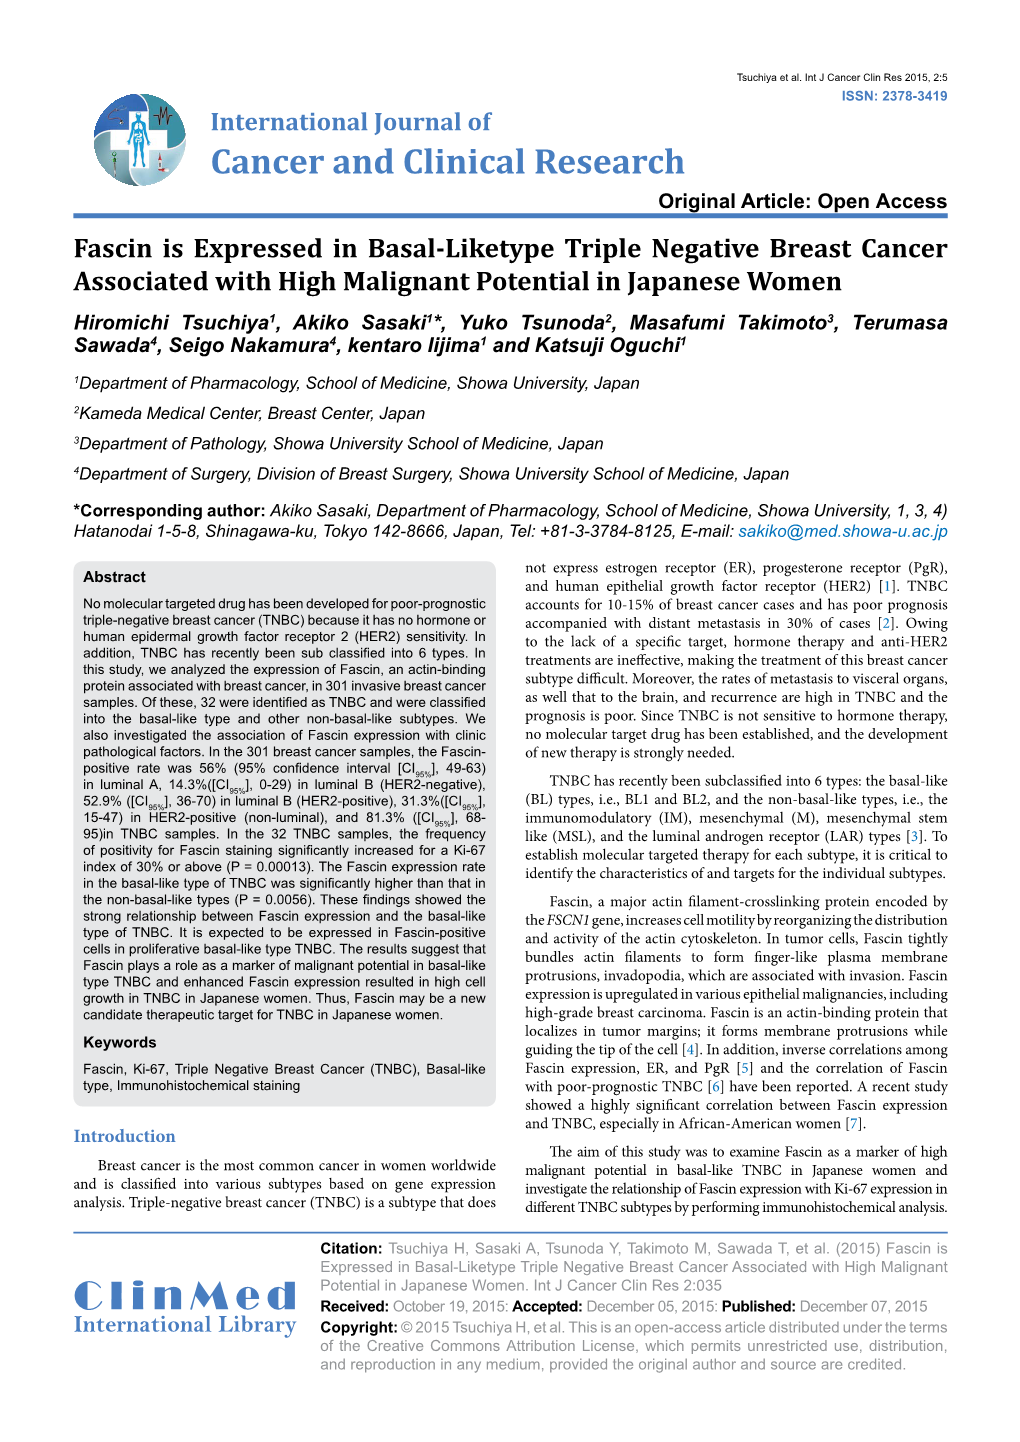 Fascin Is Expressed in Basal-Liketype Triple Negative Breast Cancer